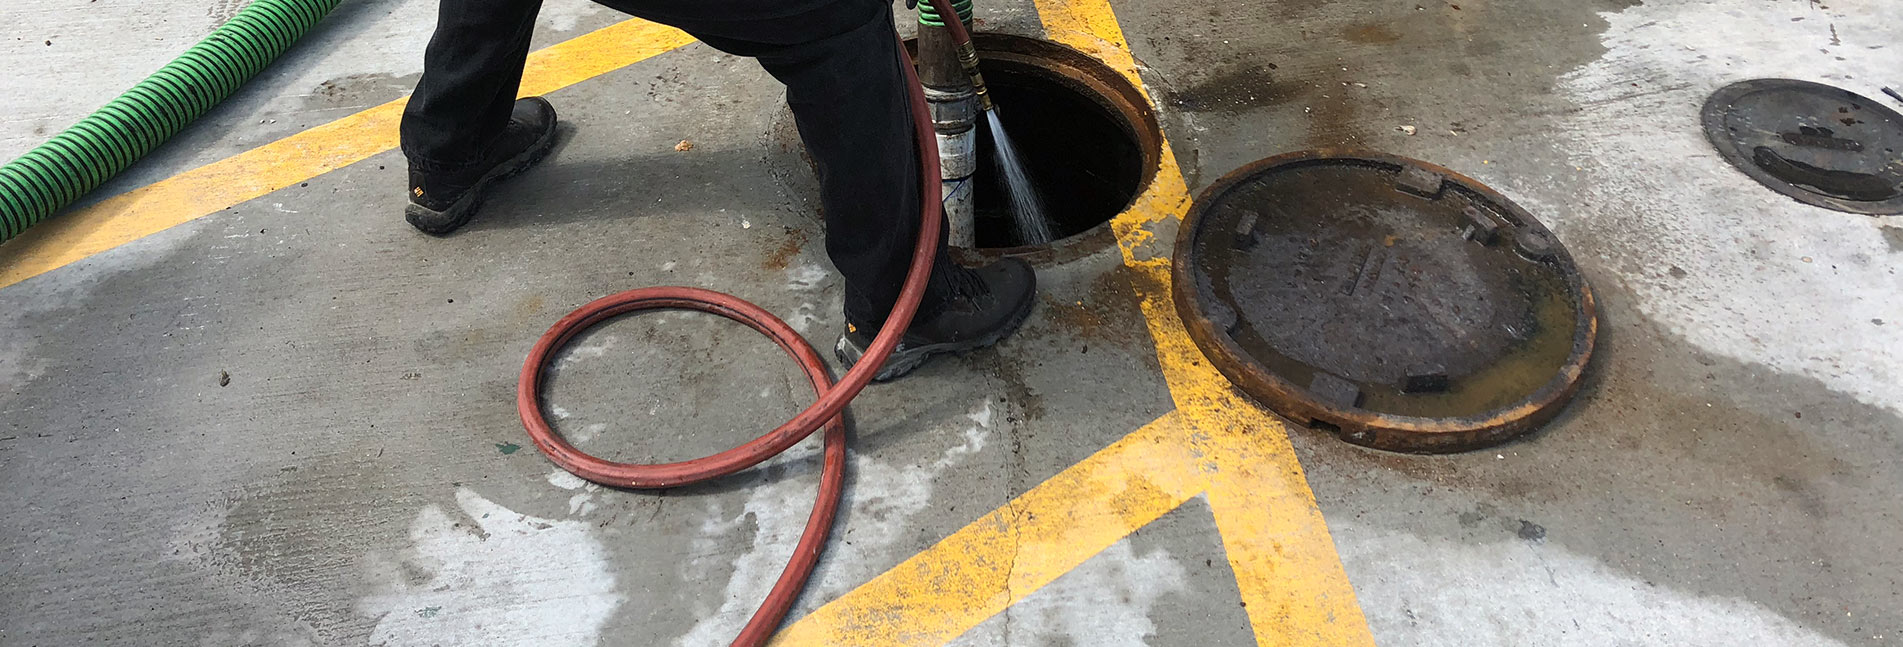 cleaning grease trap